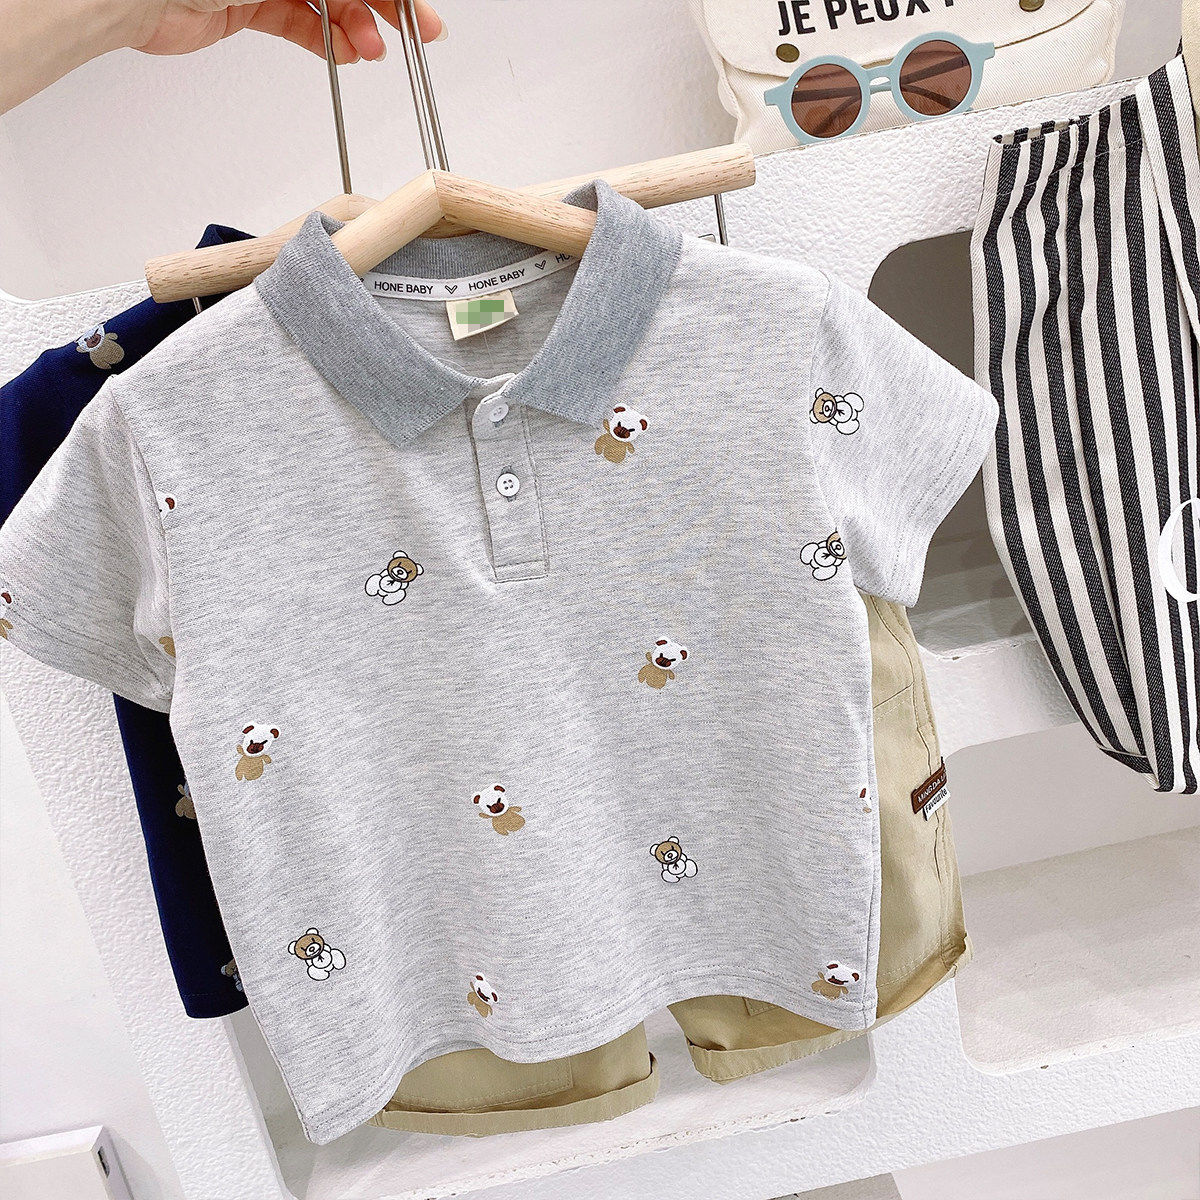 Boys short-sleeved polo shirt T-shirt summer summer clothing baby children's clothing baby cotton half-sleeved fashionable tops